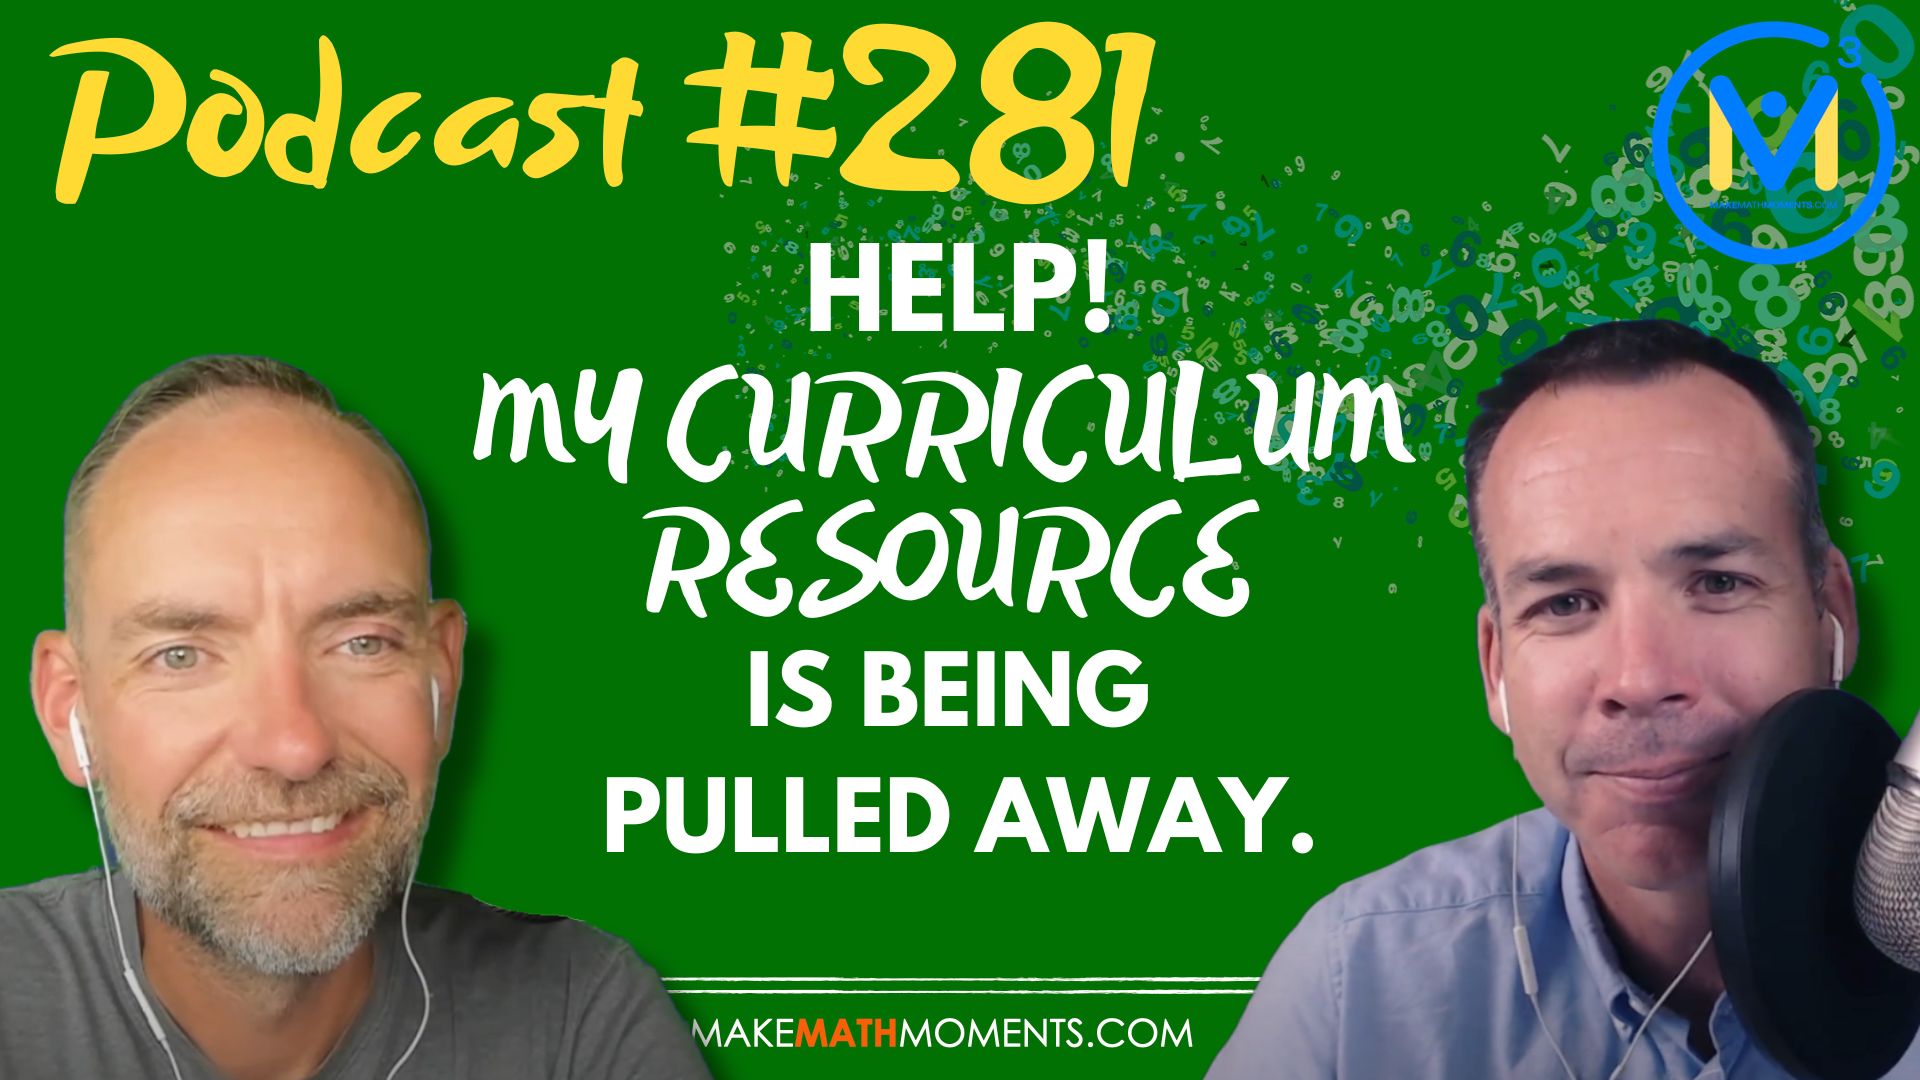 Episode #281: Help! My Curriculum Resource Is Being Pulled Away. What Do I Do Now? – A Where Are They Now Math Mentoring Moment